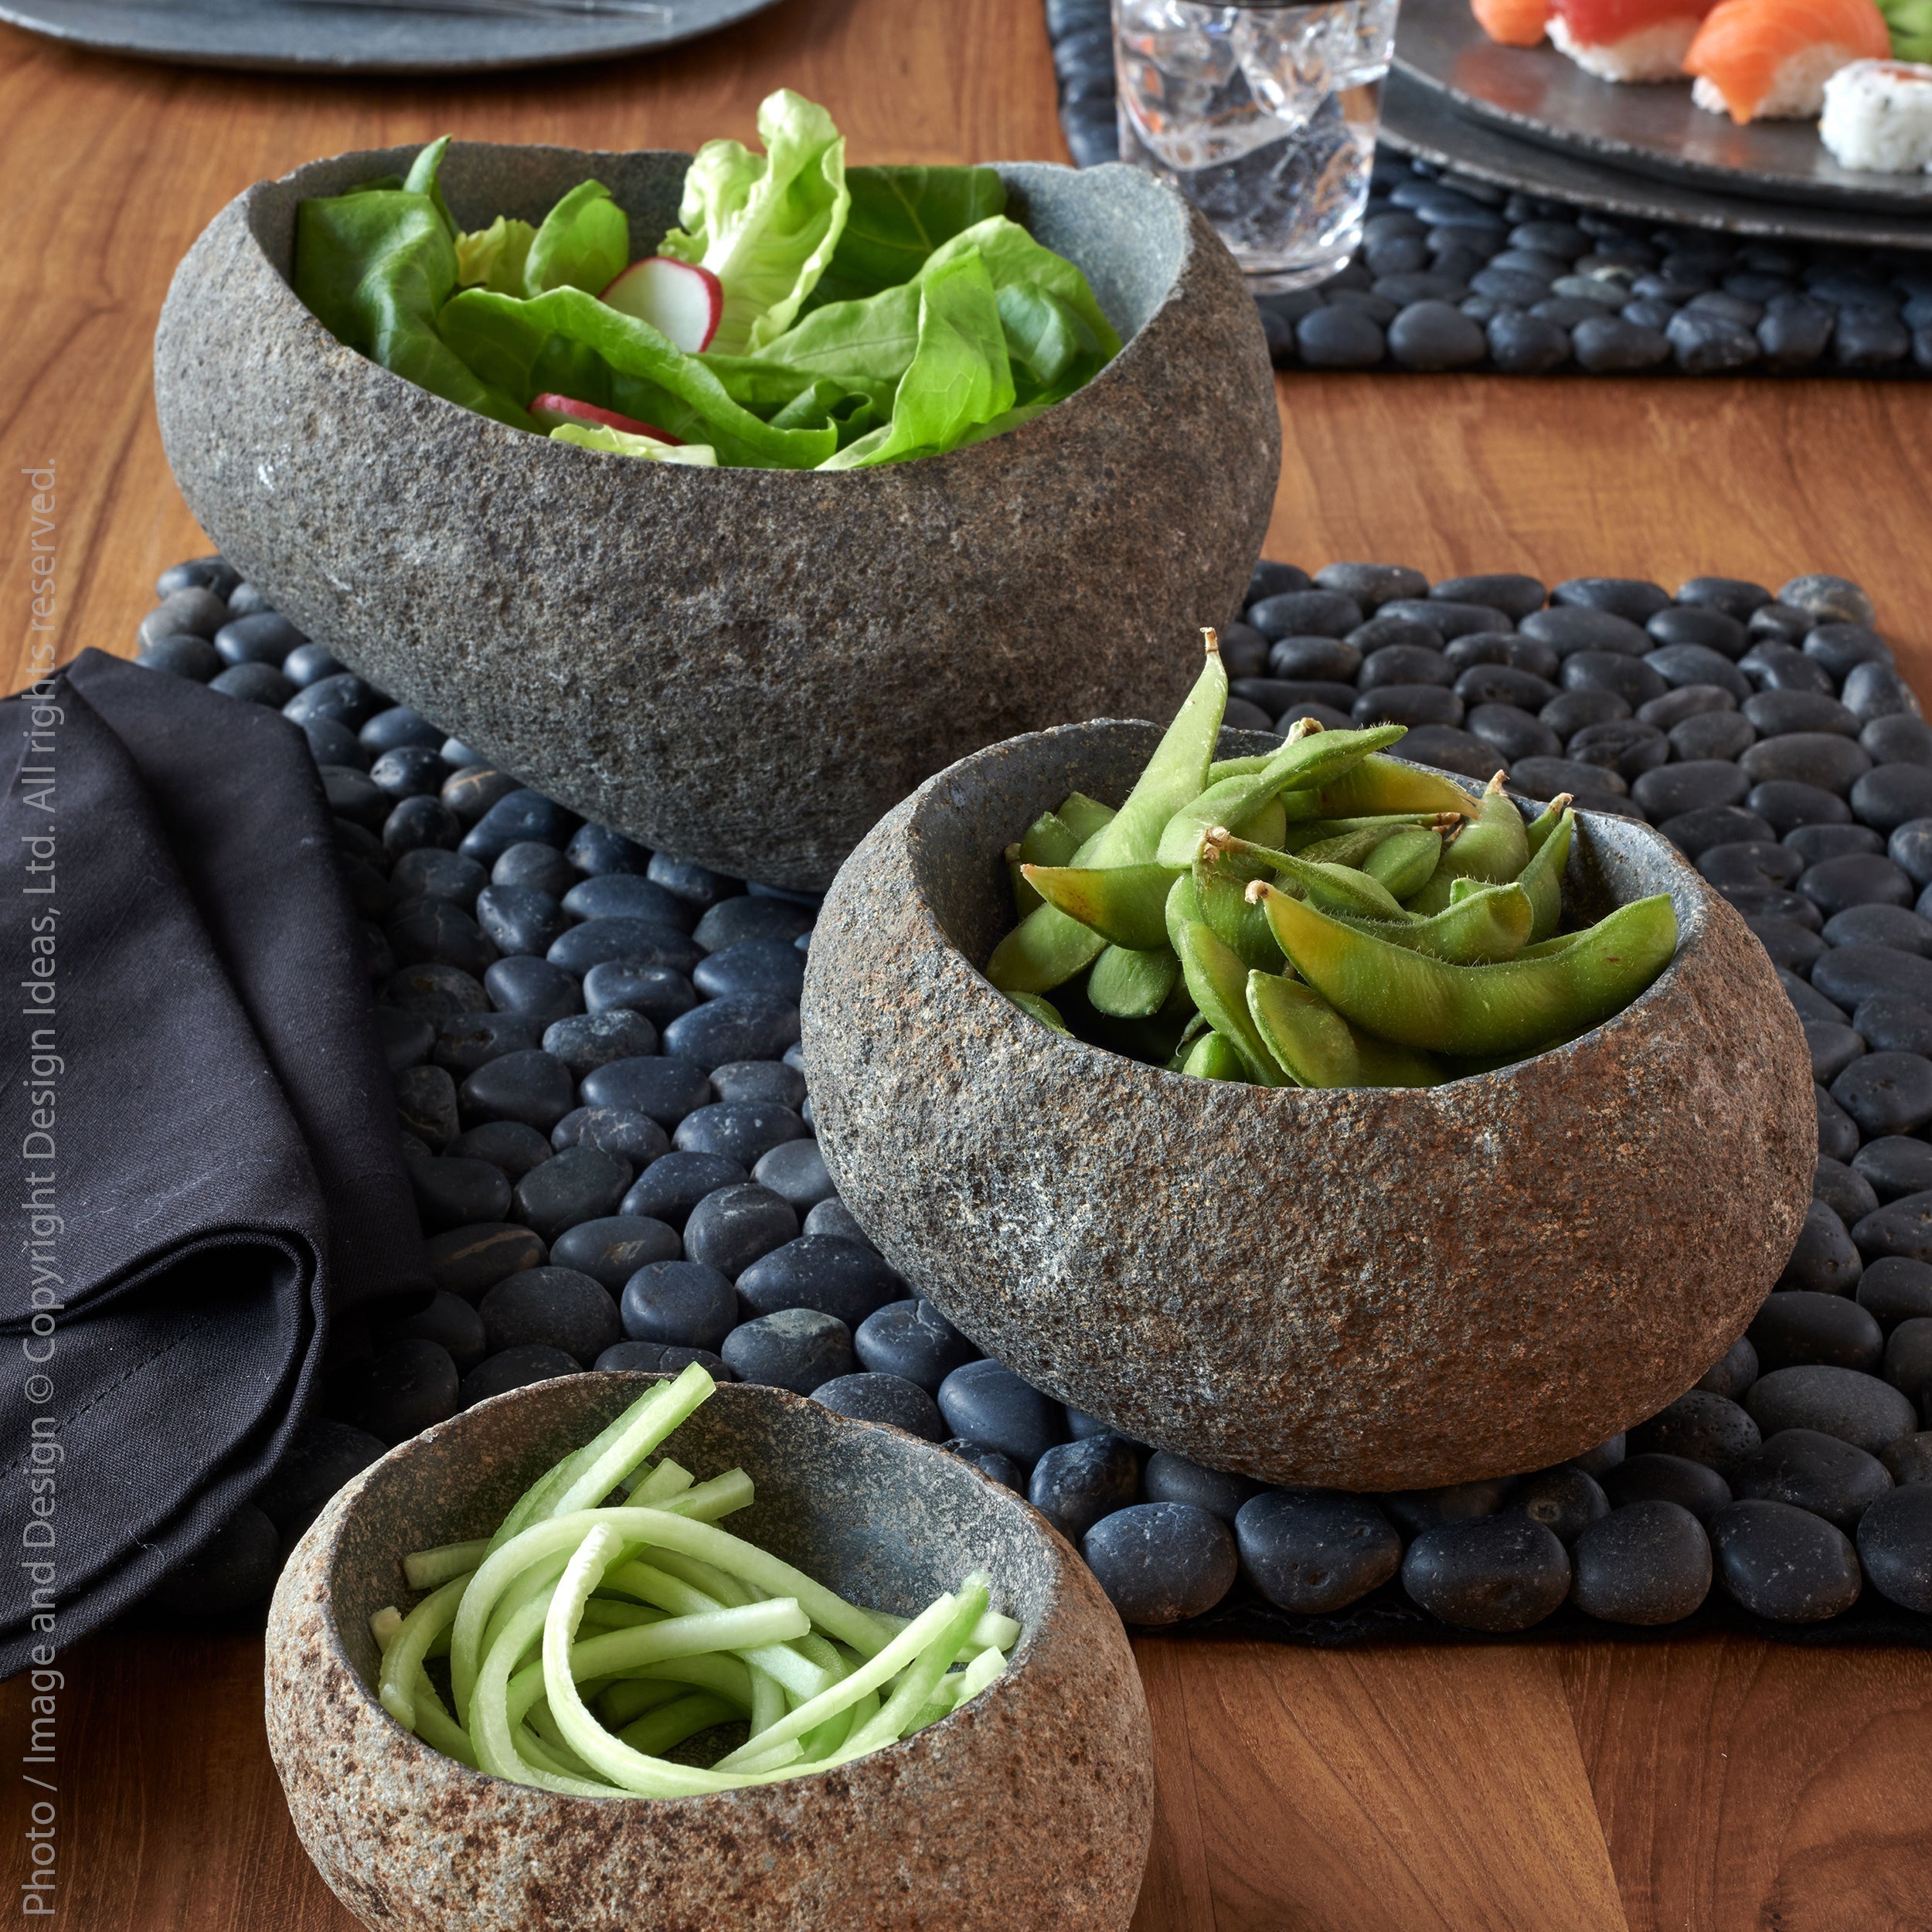 Stoneshard™ bowl (5.9 x 6.3 x 3.2 in.) - Gray | Image 2 | Premium Bowl from the Stoneshard collection | made with Riverstone for long lasting use | texxture